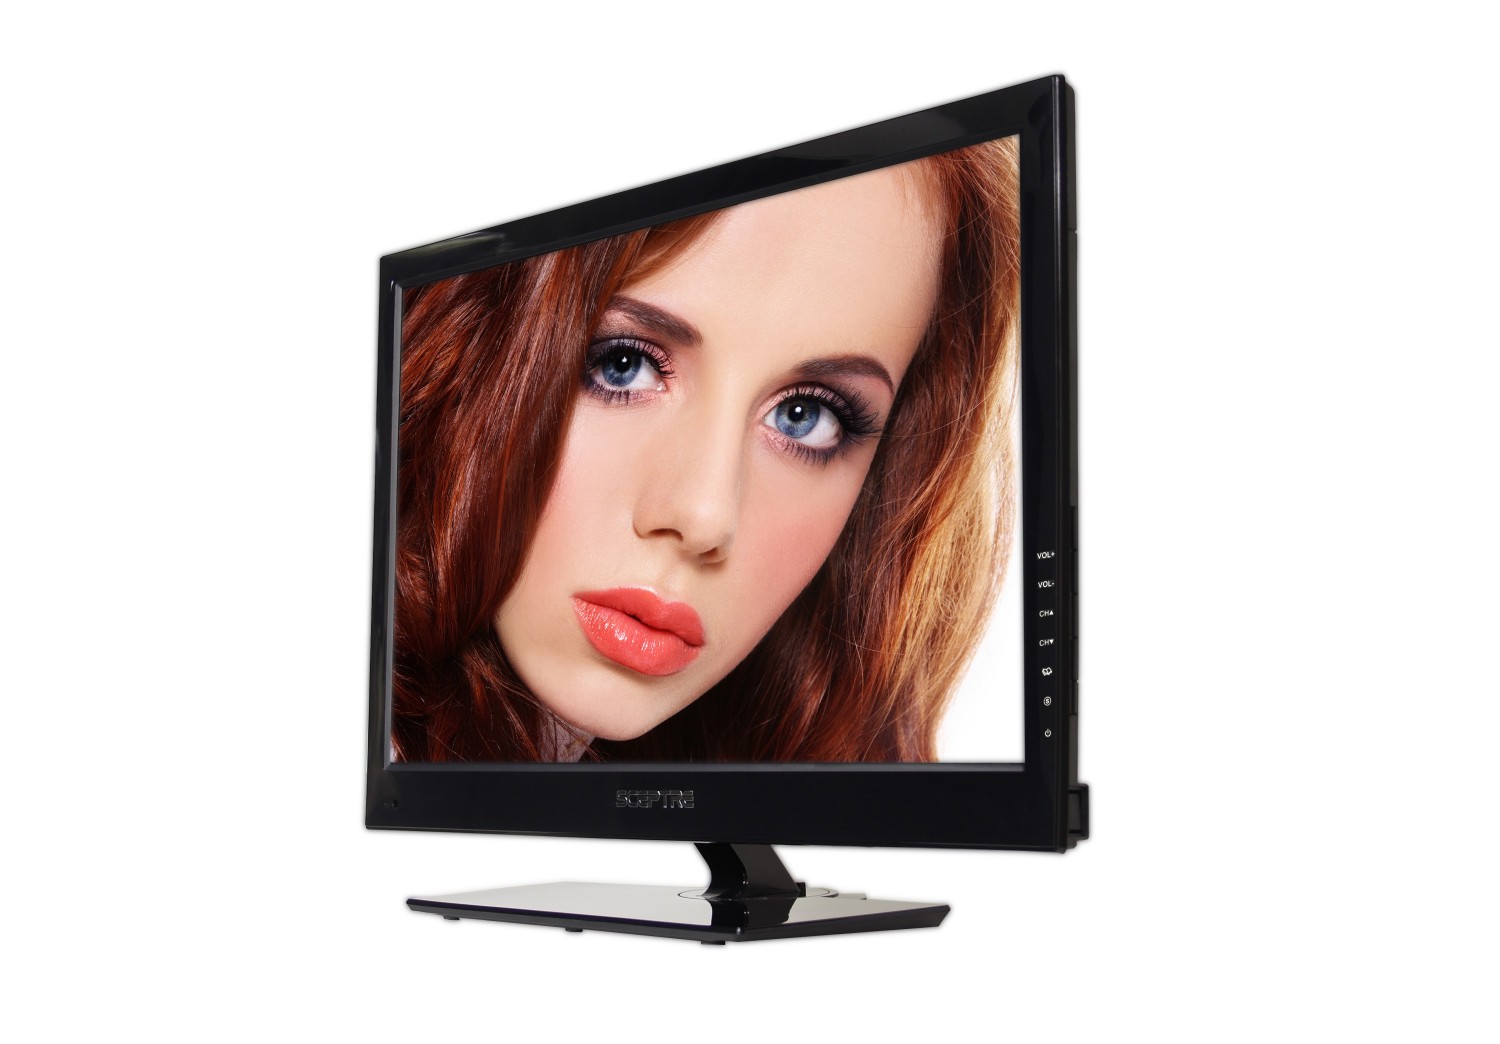 Uniden 23.6'' LED TV with DVD Player